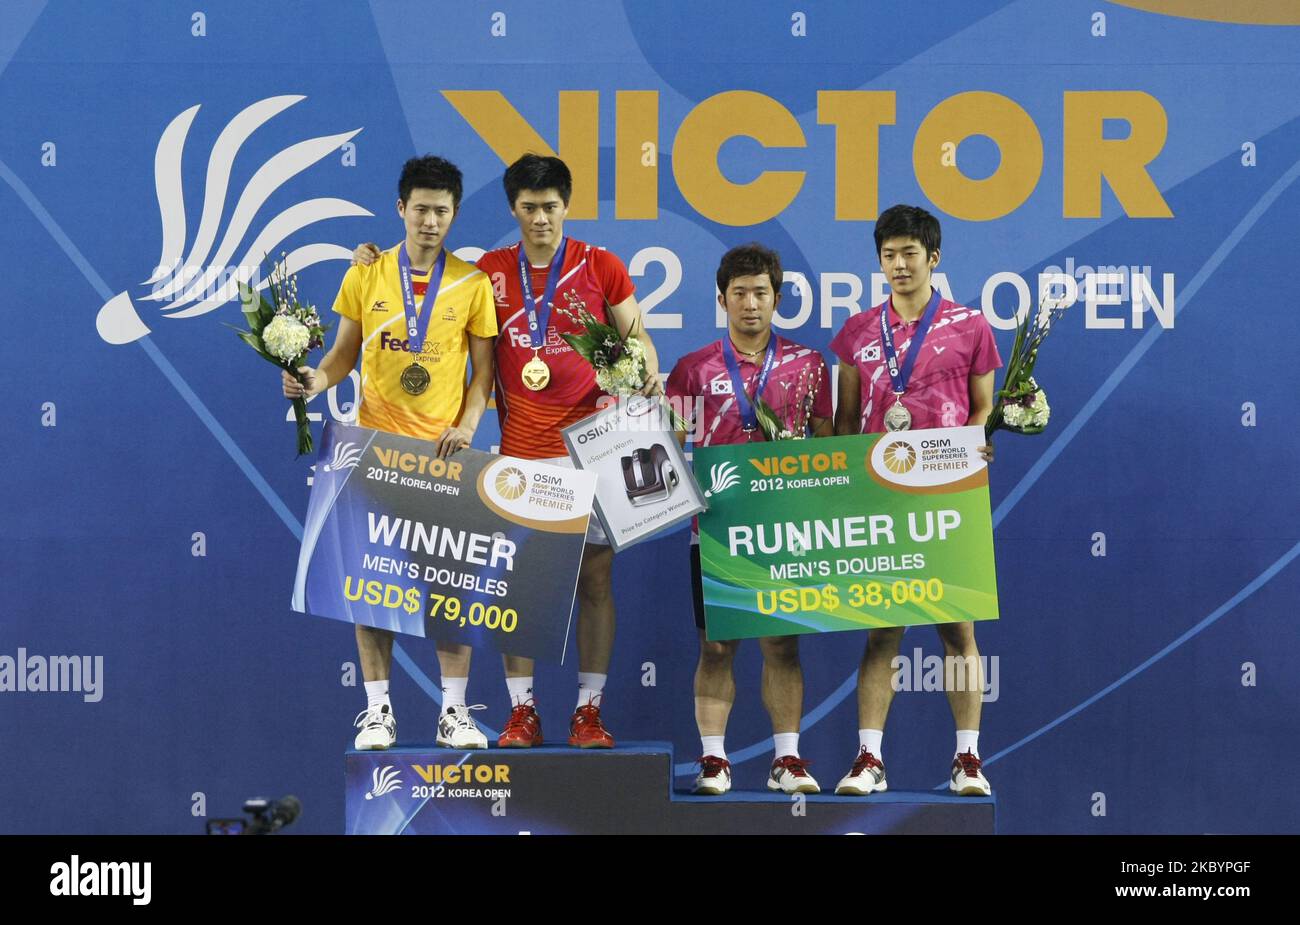 (from left) China's Cai Yun, Fu Haifeng and South Korea's Jung Jae Sung, Lee Yong Dae award ceremony on the podium after match in the man double final match at the Korea Open Badminton Super Series Premier in Olympic Park in Seoul, South Korea on 8 January 2012. China defeated South Korea 18-21, 21-17, 21-19. (Photo by Seung-il Ryu/NurPhoto) Stock Photo